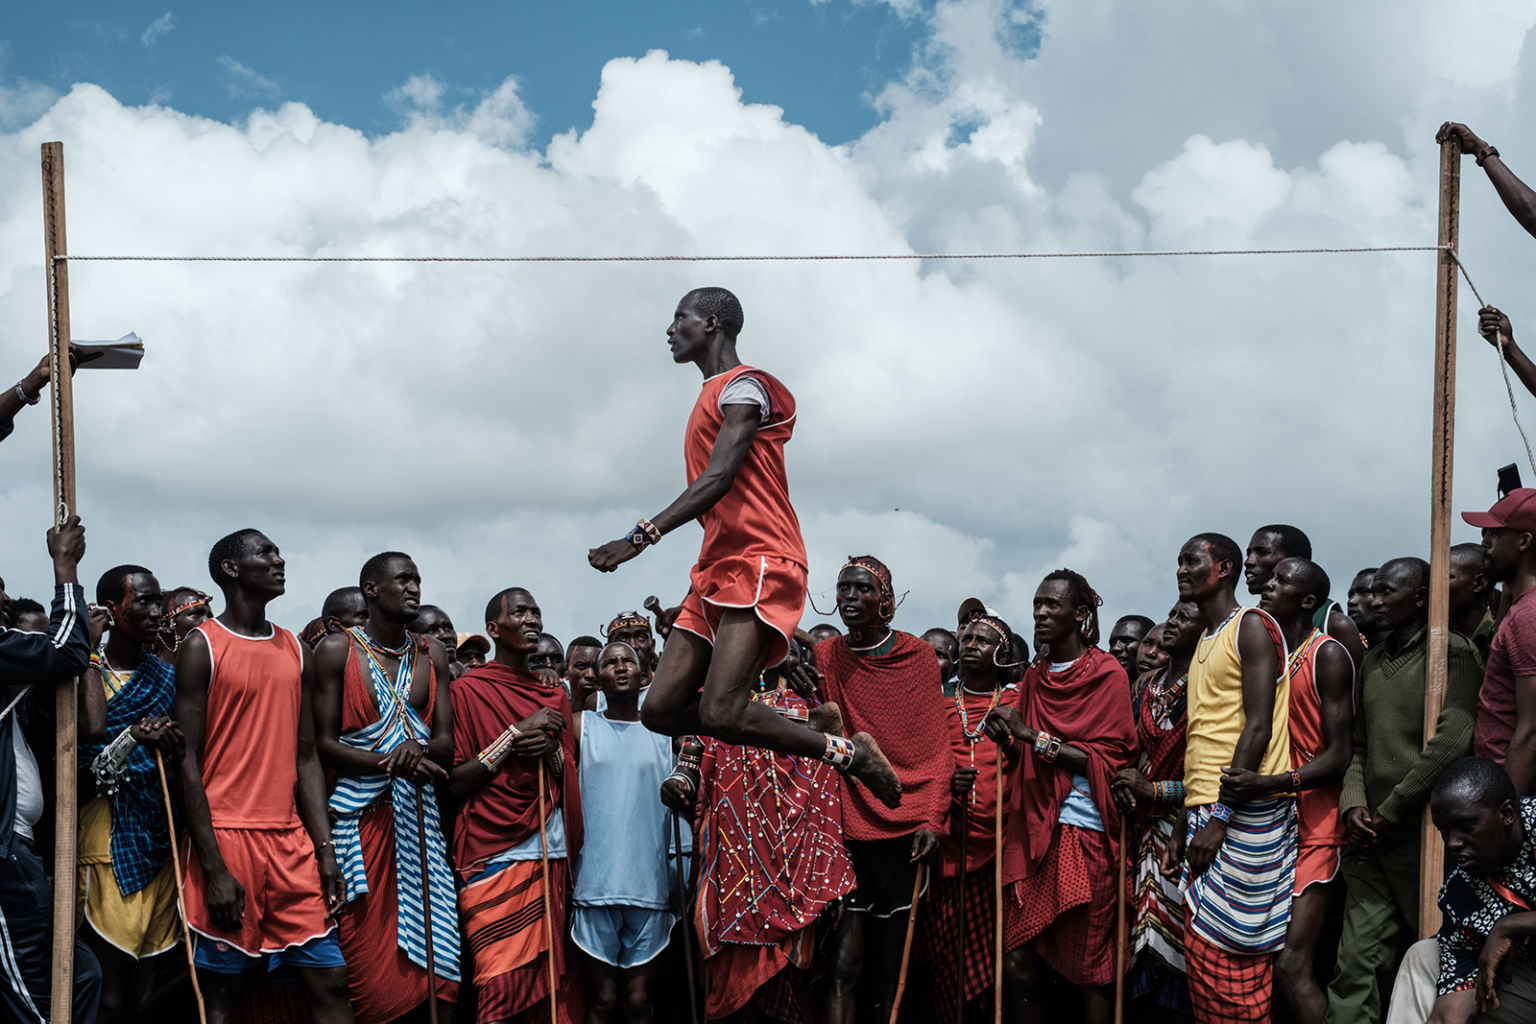 A Maasai warrior jumps to reach a rope during a sporting event dubbed the Maasai Olympics at Kimana, near Kenya's bordertown with Tanzania, on Dec. 15. The event, held every two years since 2012, is an initiative of international conservation groups to offer Maasai warriors an alternative to killing lions as part of their traditional rite of passage.  YASUYOSHI CHIBA/AFP/Getty Images